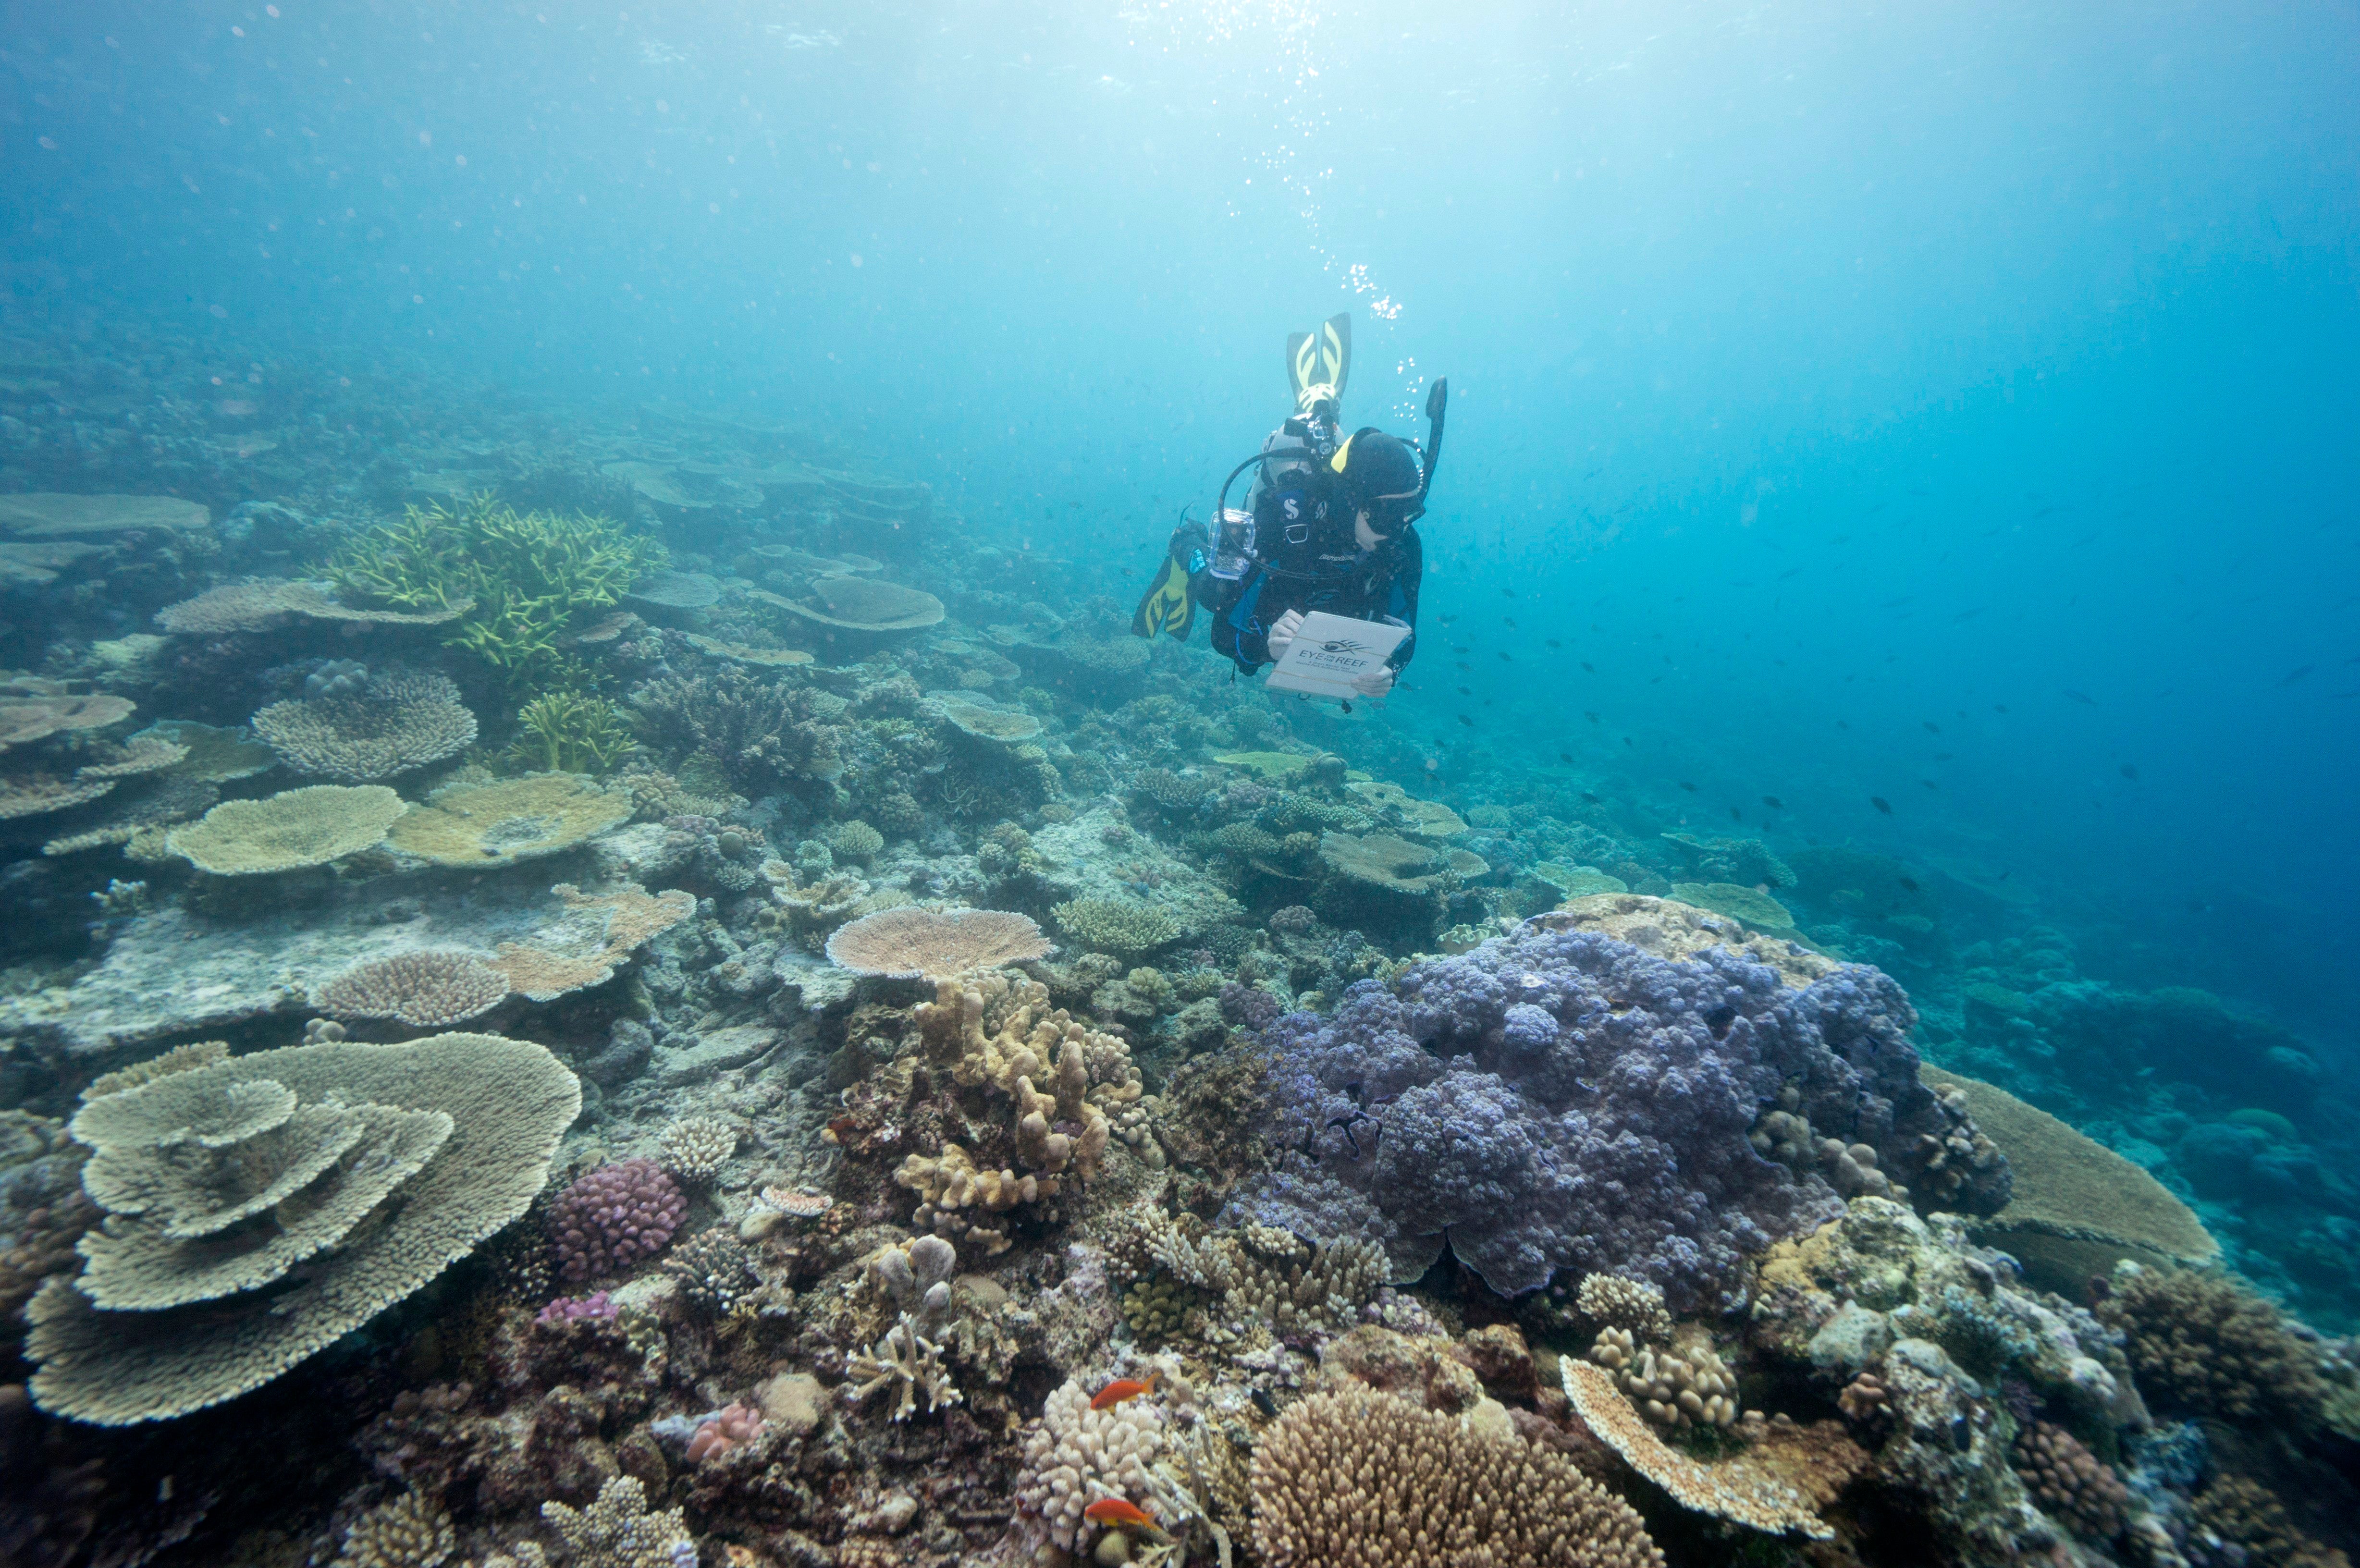 In this file photo, a diver monitors the health of the Great Barrier Reef off the Australian coast